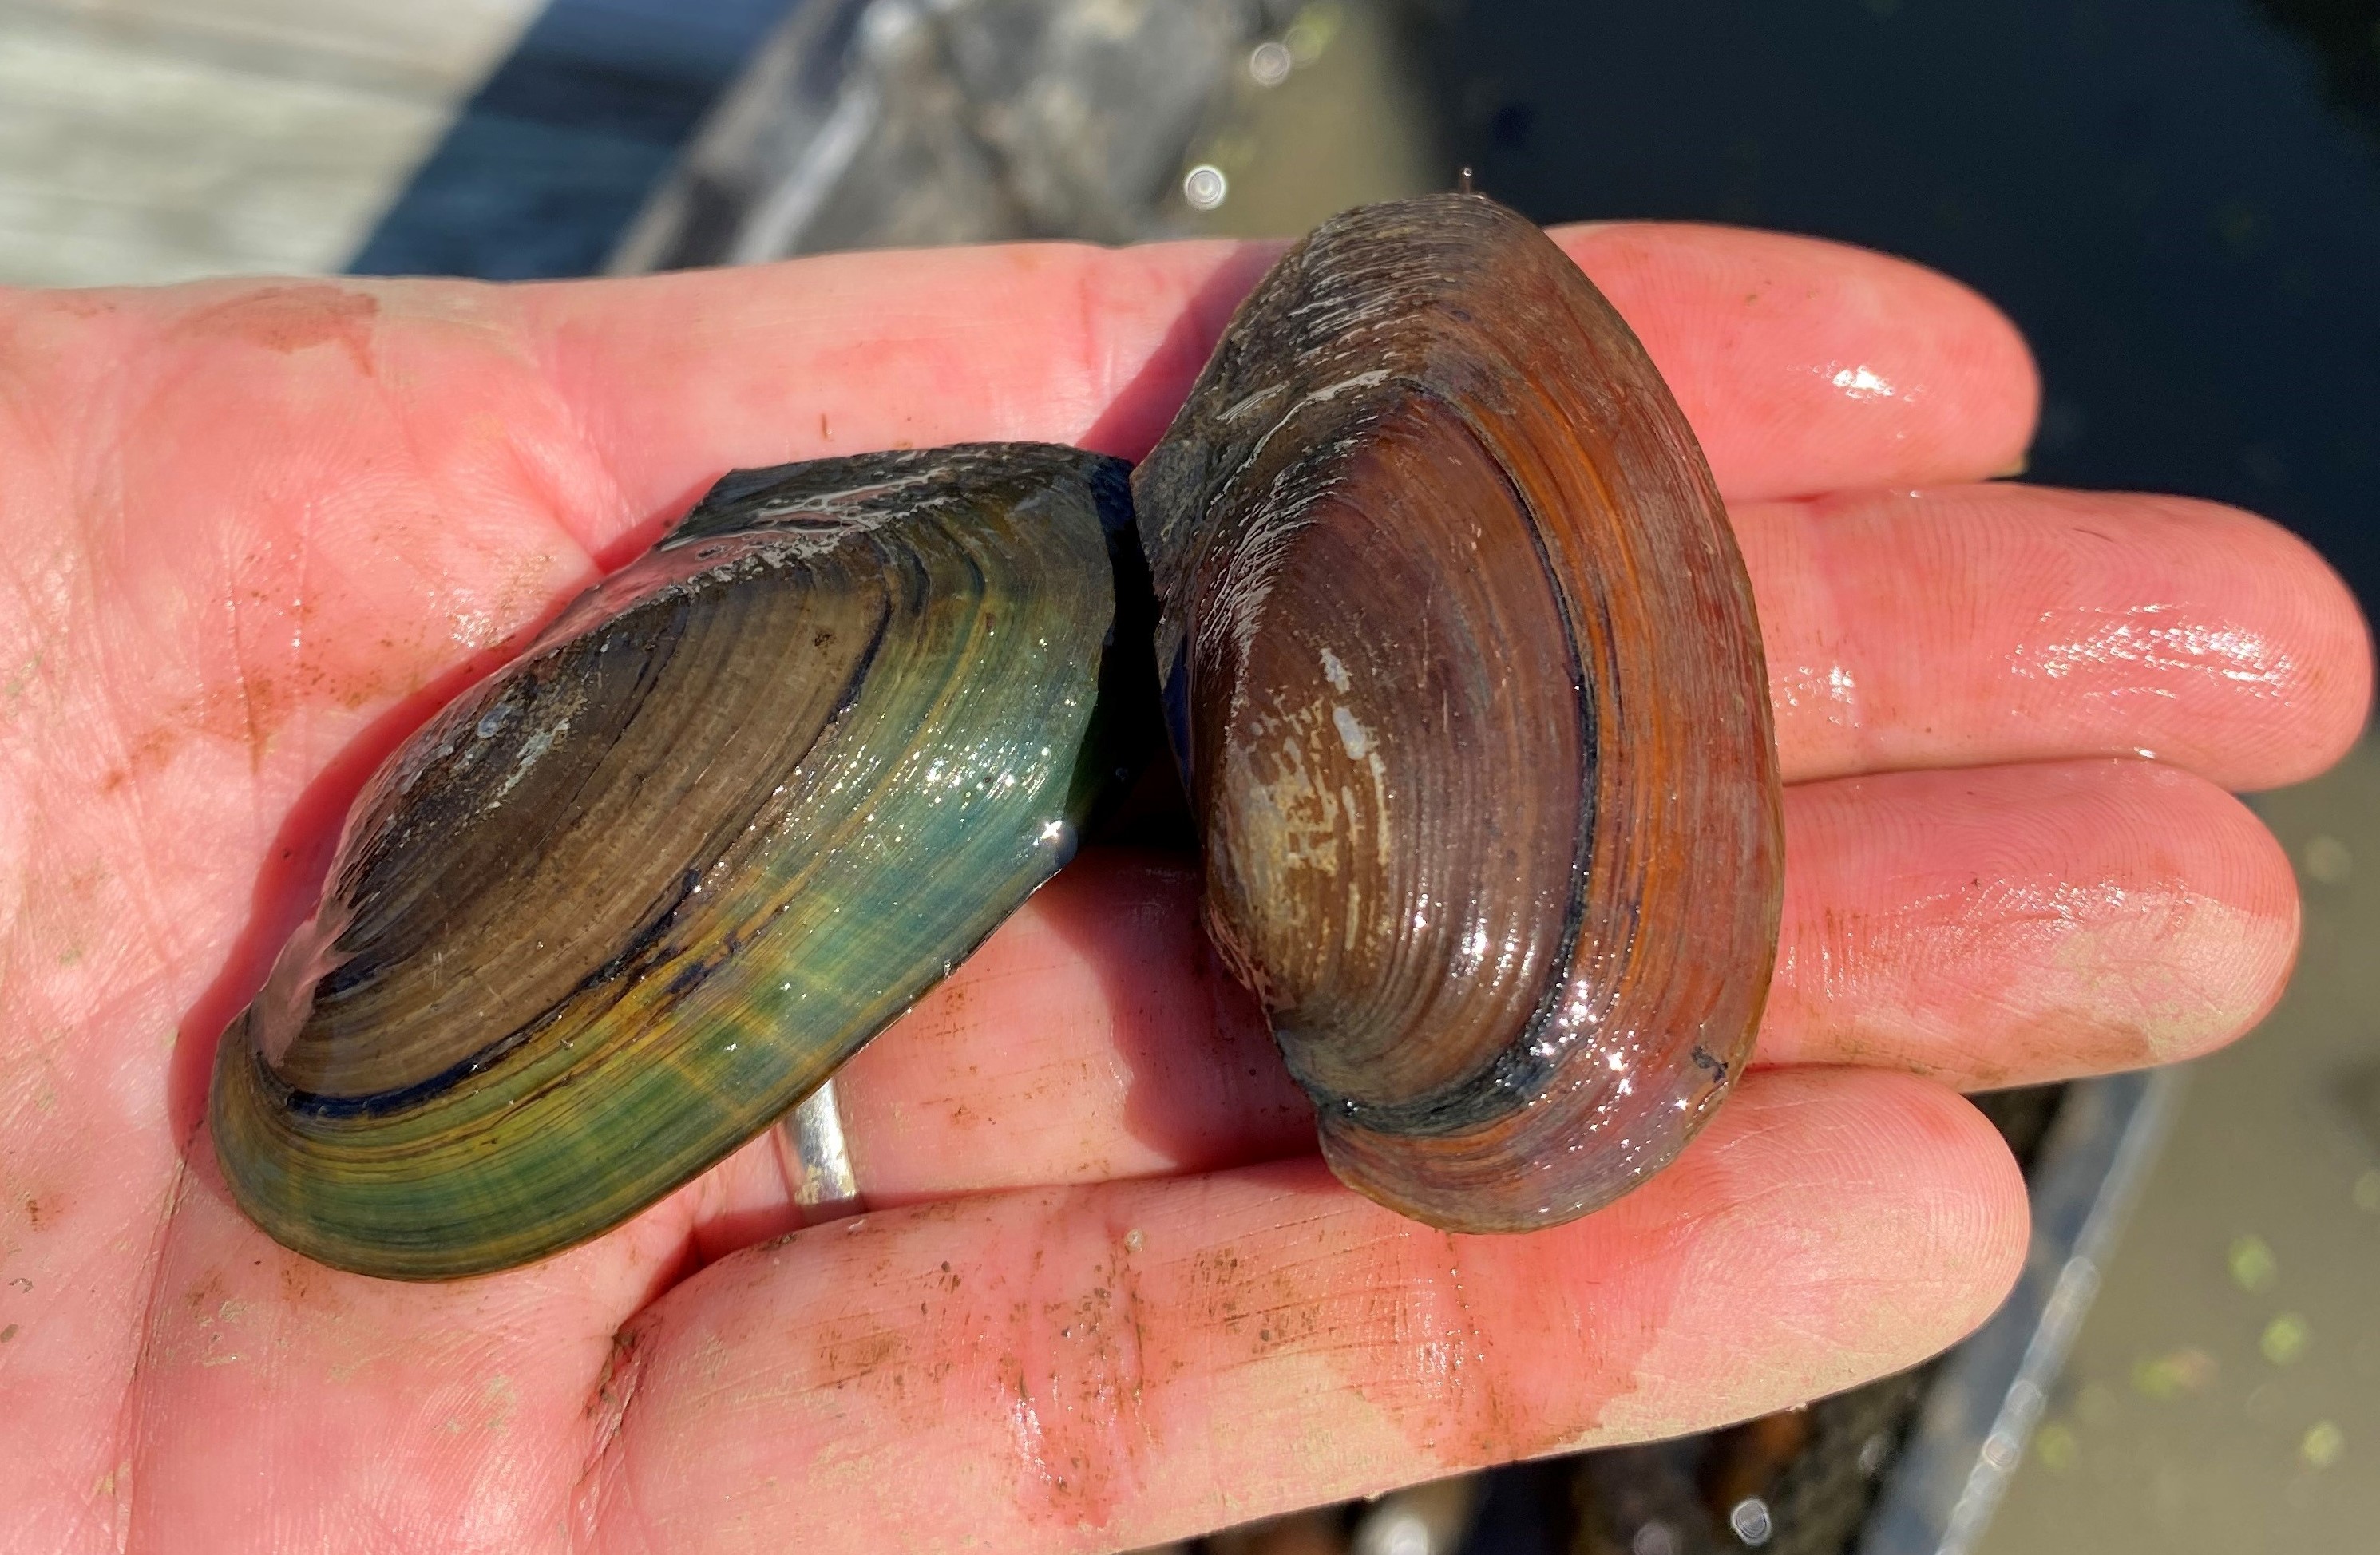 In partnership with the Anacostia Watershed Society, young freshwater mussels are being monitored on JBAB. The mussels are regularly monitored and their growth is recorded and compared to other mussel nurseries in the region. Once at an adequate size, the mussels will be transferred to their permanent home on mussel reefs in the Potomac and Anacostia Rivers.